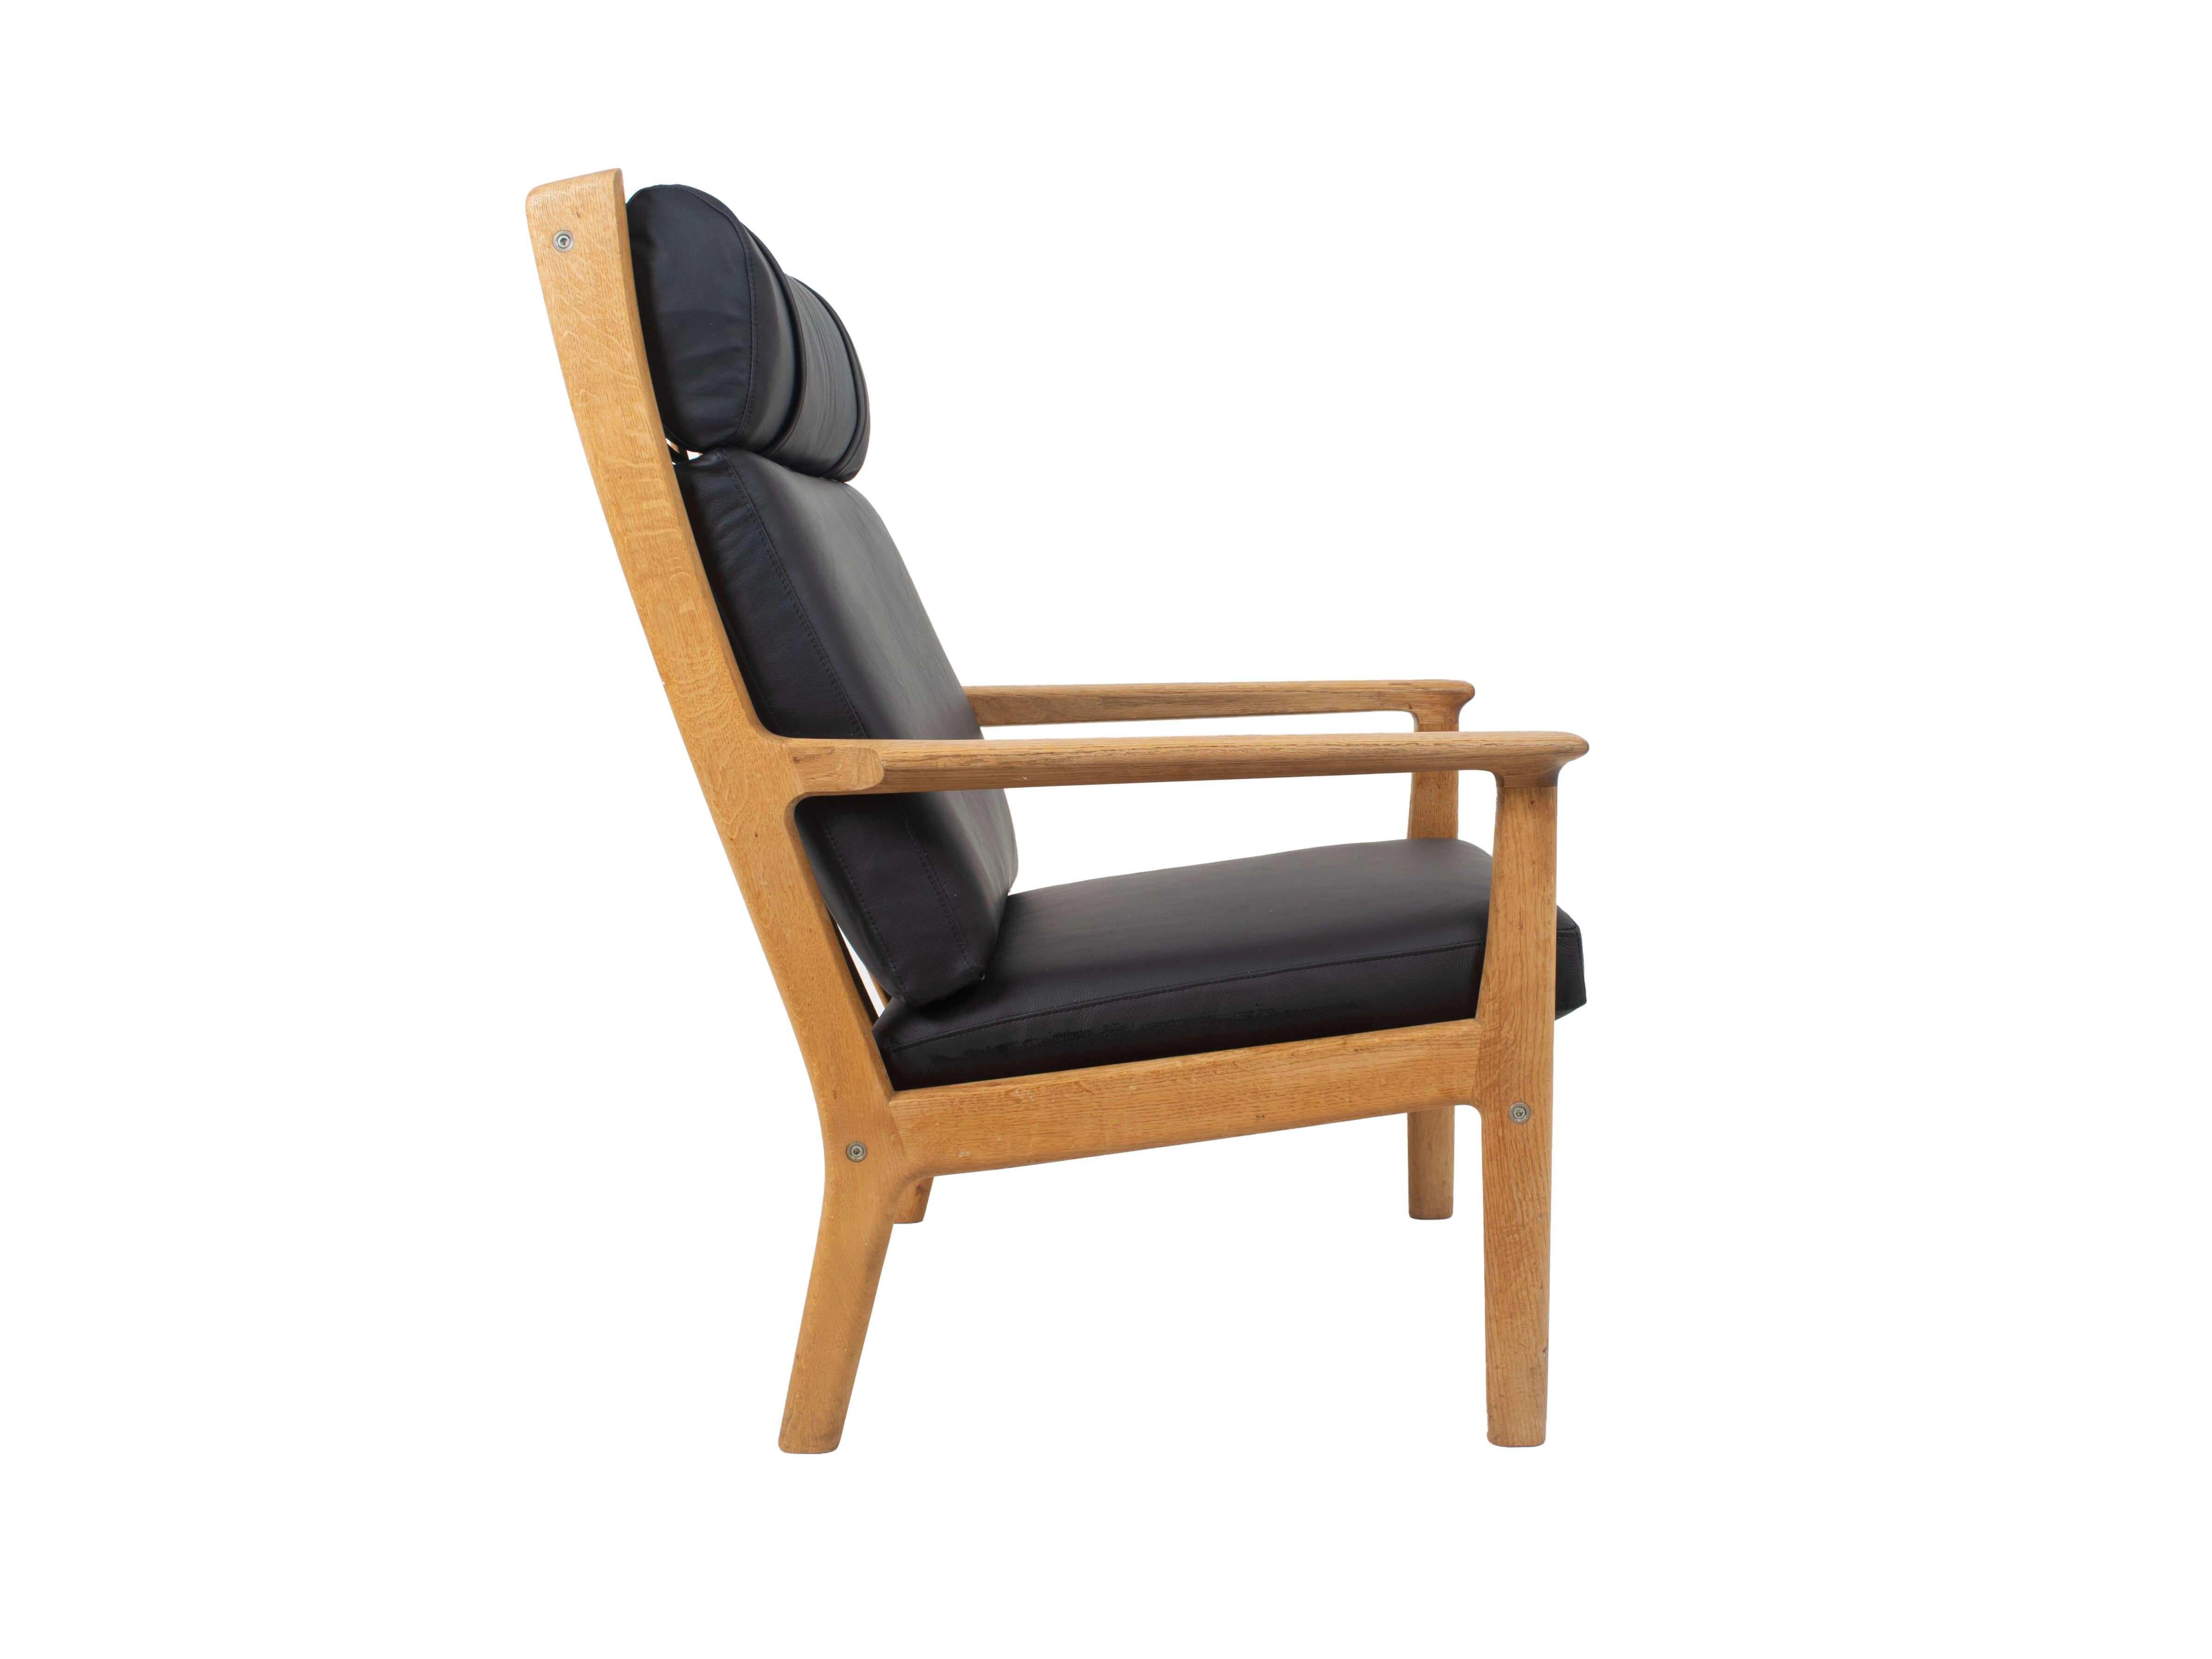 Danish Hans Wegner Fauteuil GE 265 for GETAMA in Oak and Black Leather, 1980 For Sale